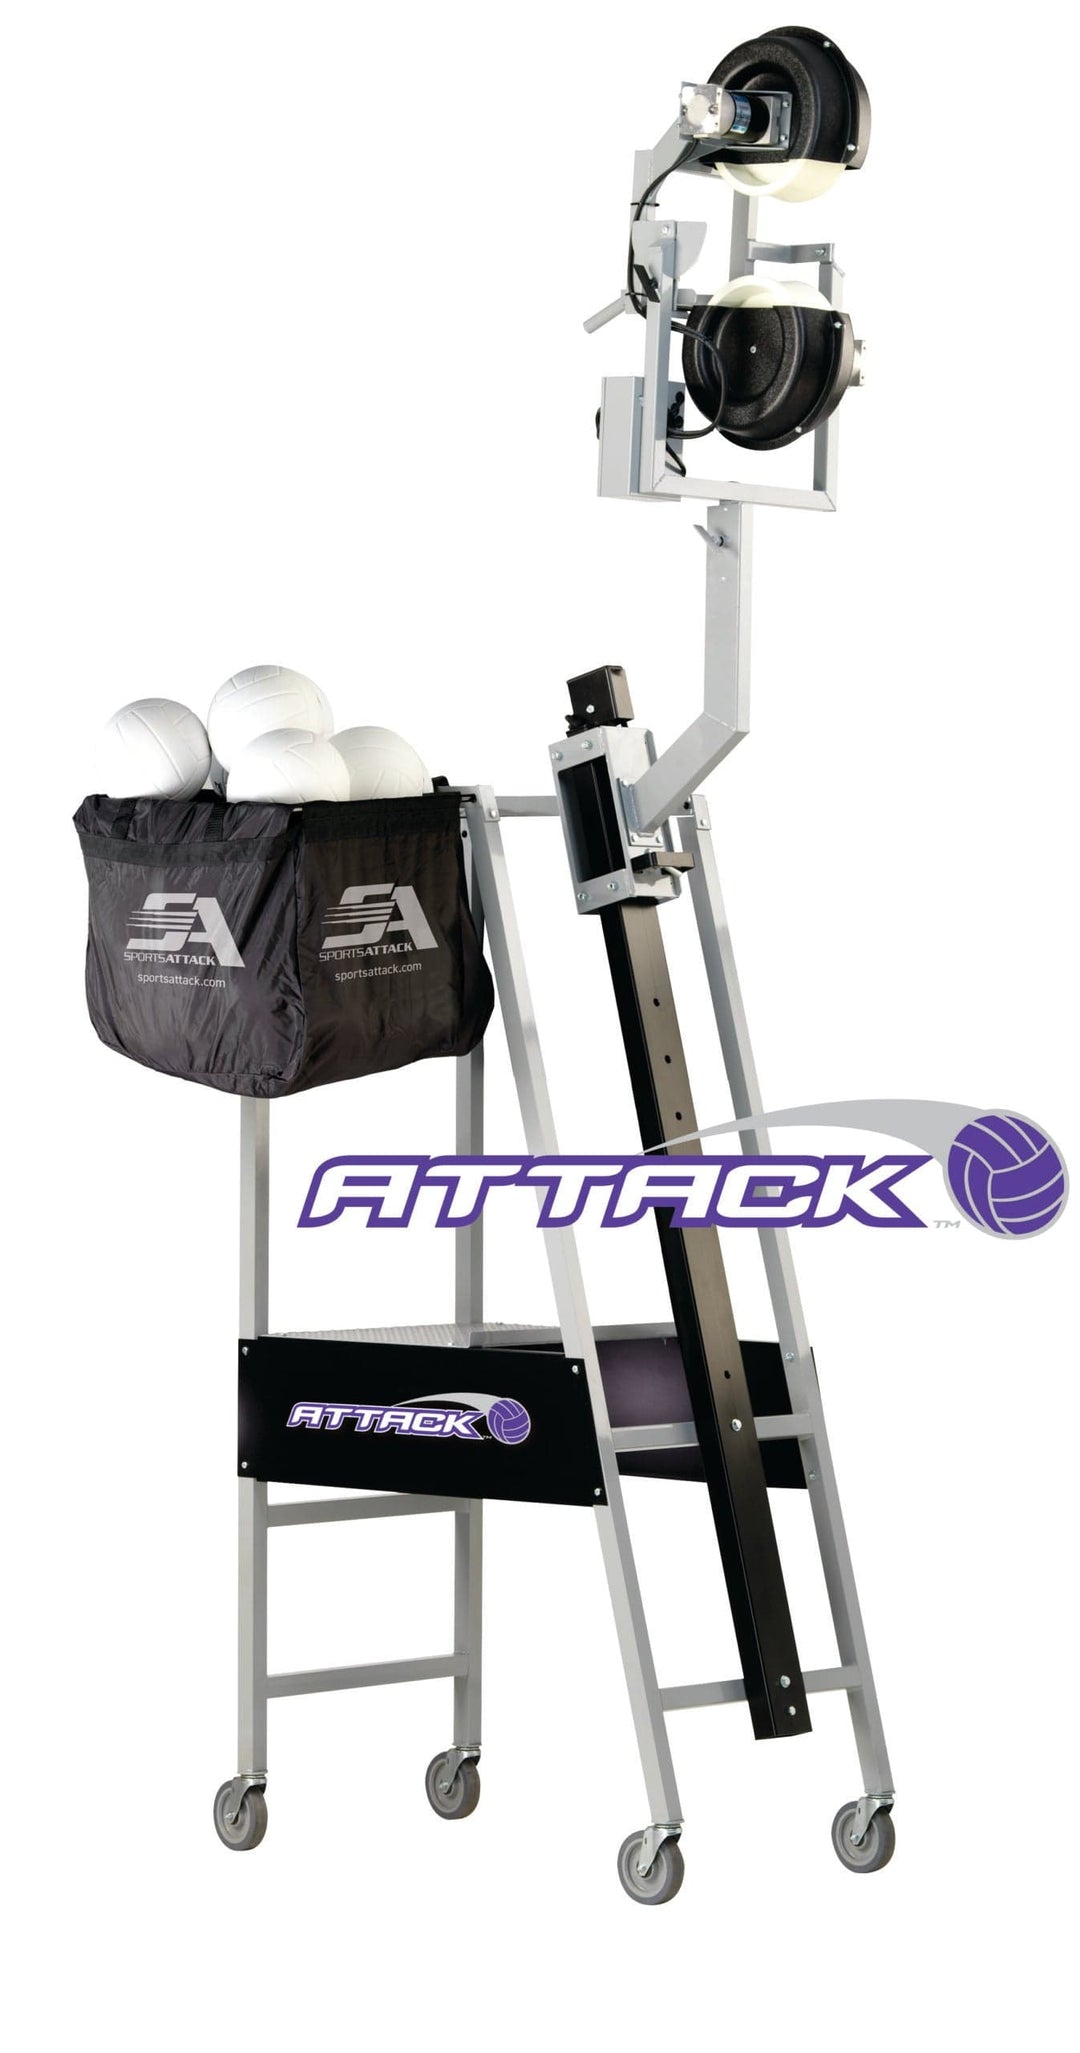 Sports Attack Machines and Accessories Attack Volleyball Machine | Sports Attack